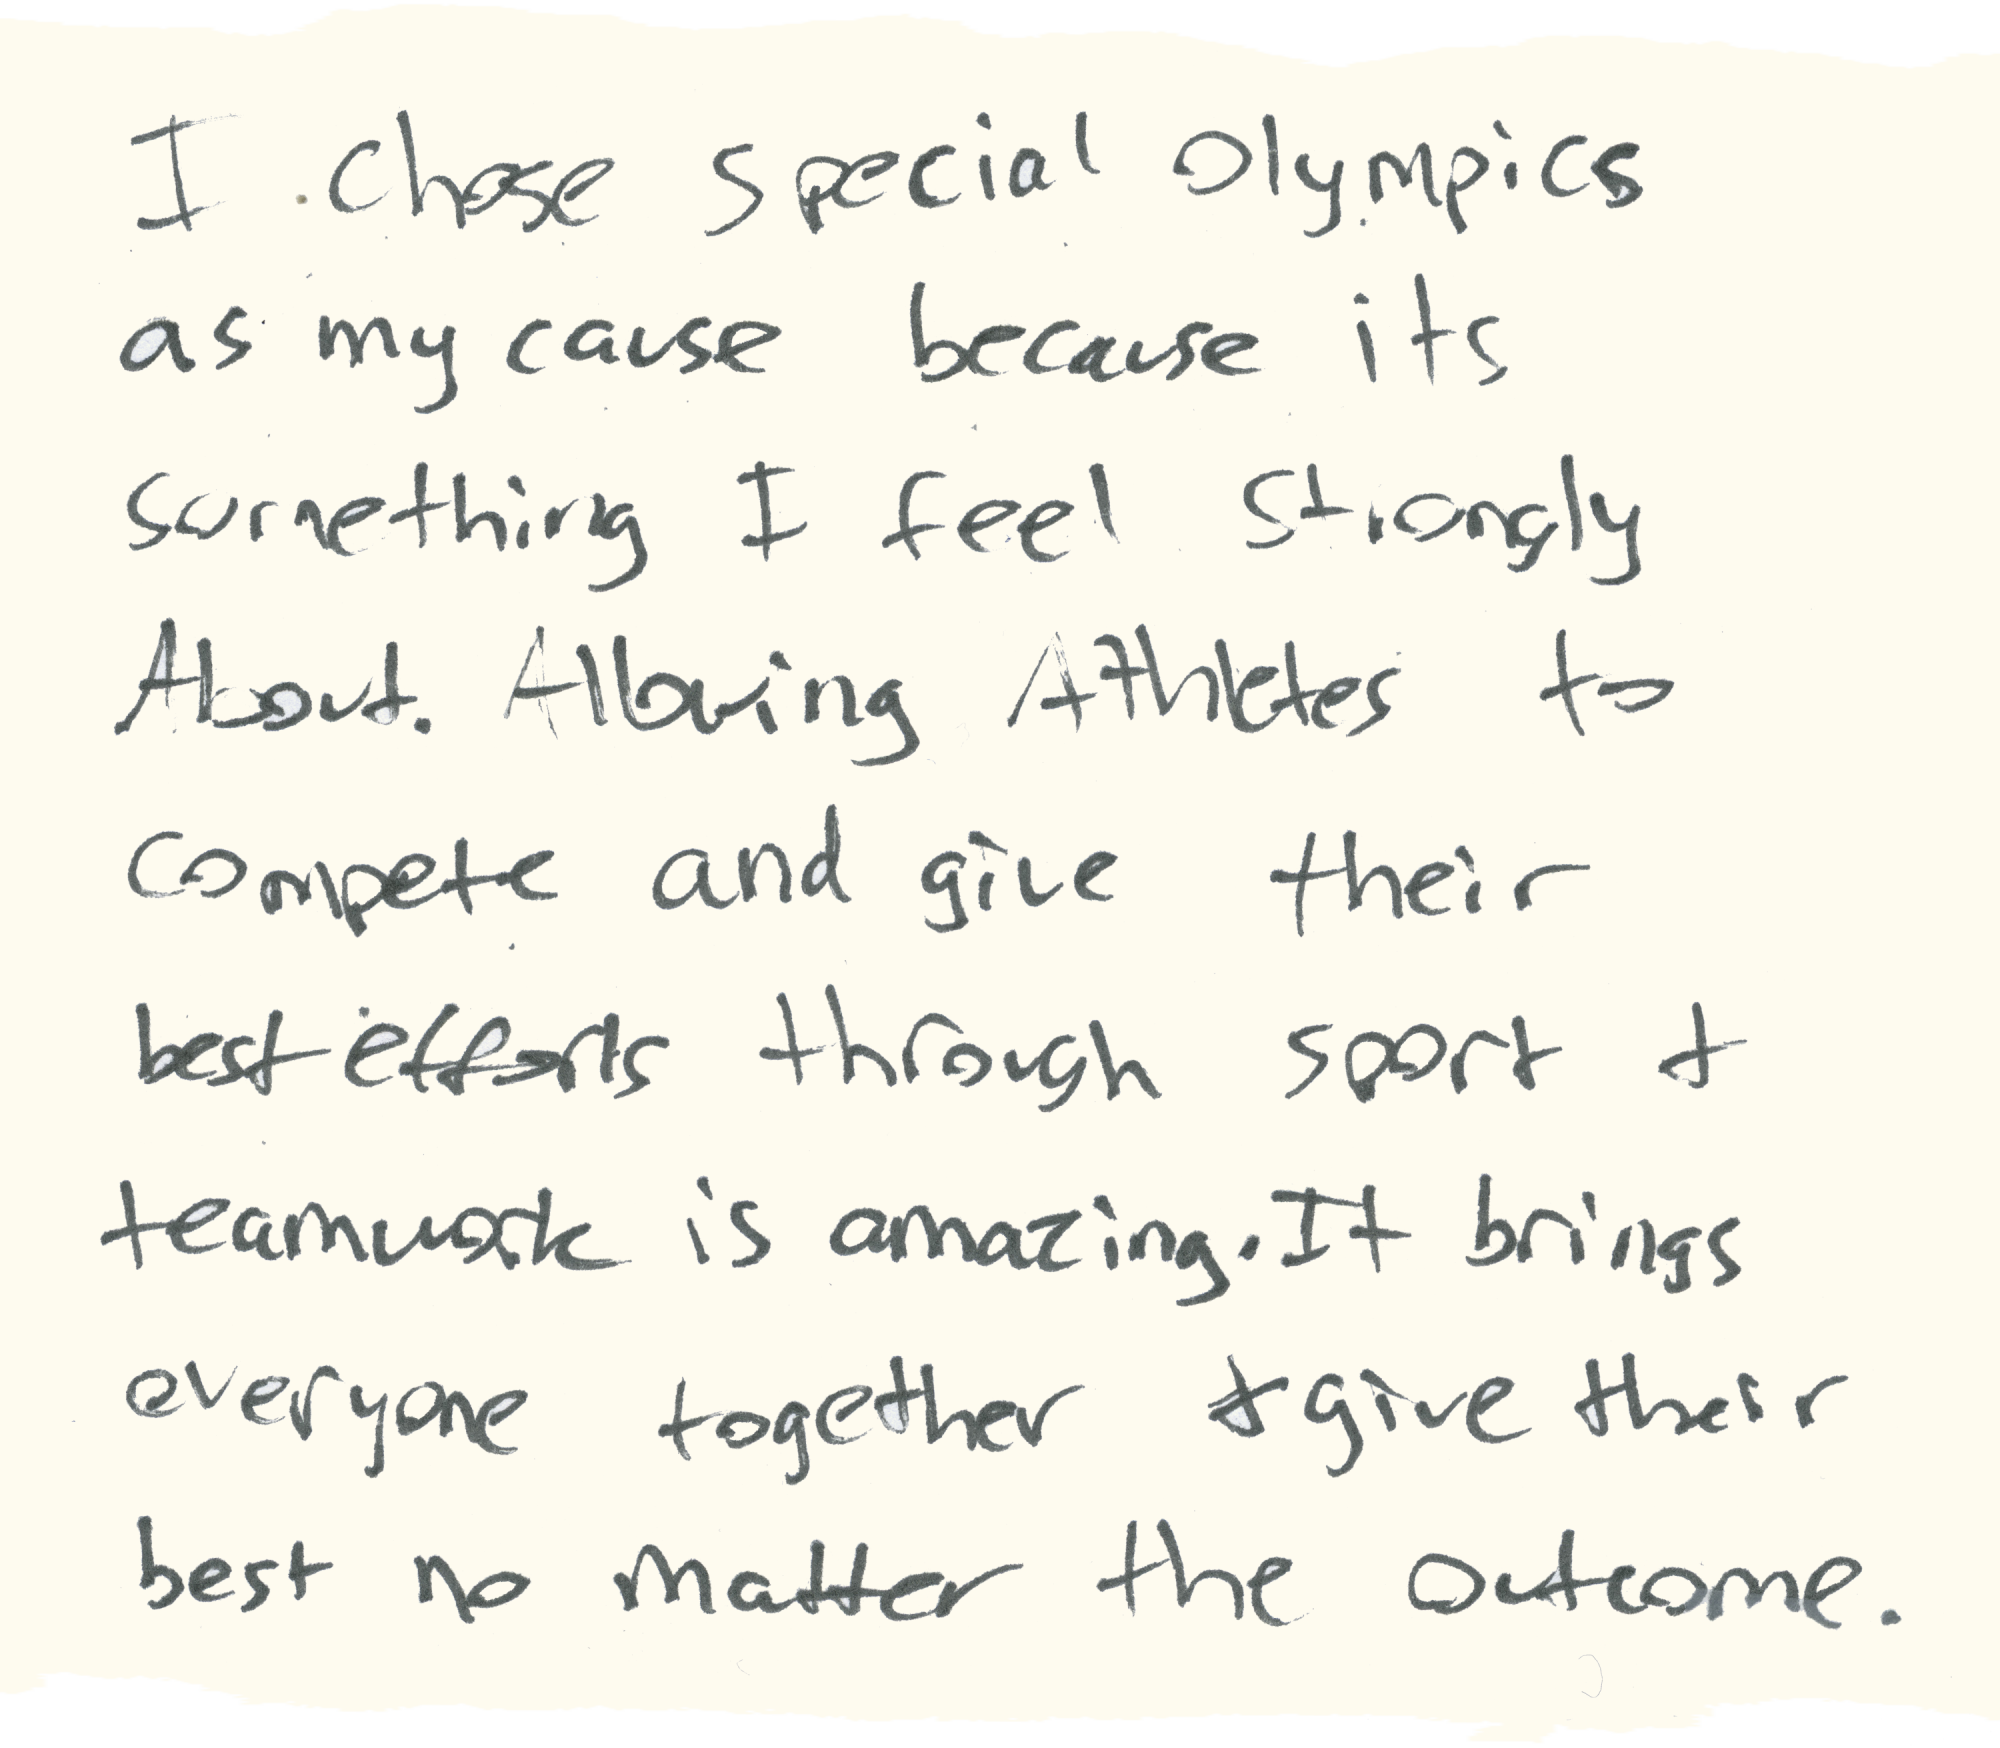 I chose the Special Olympics because ... allowing athletes to compete through sport + teamwork ... brings everyone together.